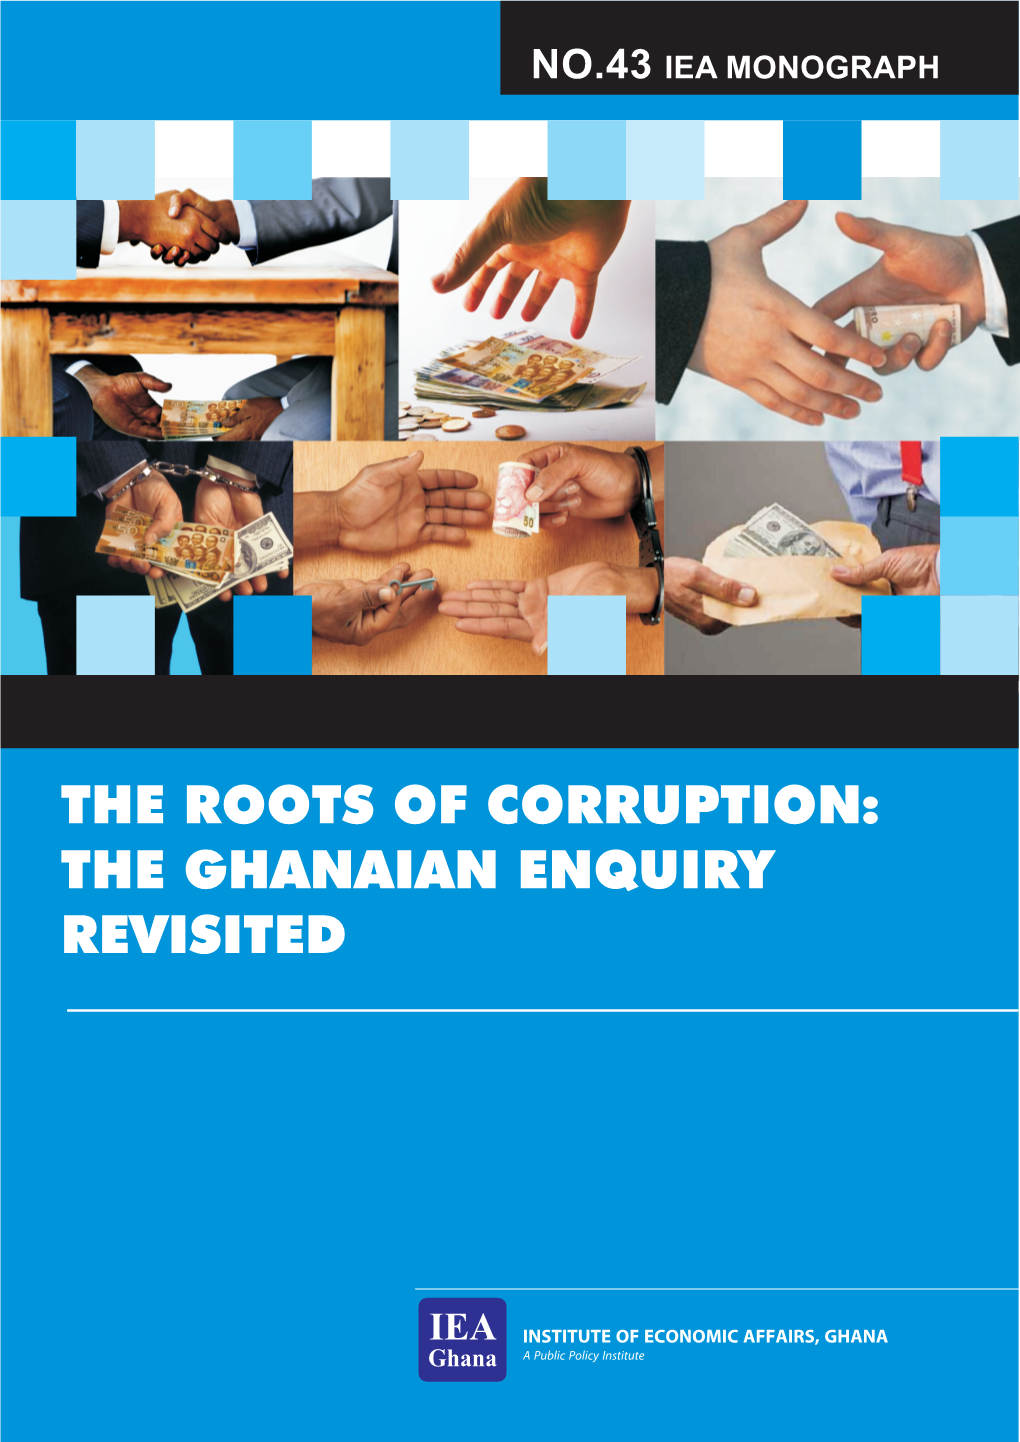 Ghana the ROOTS of CORRUPTION: the GHANAIAN ENQUIRY REVISITED